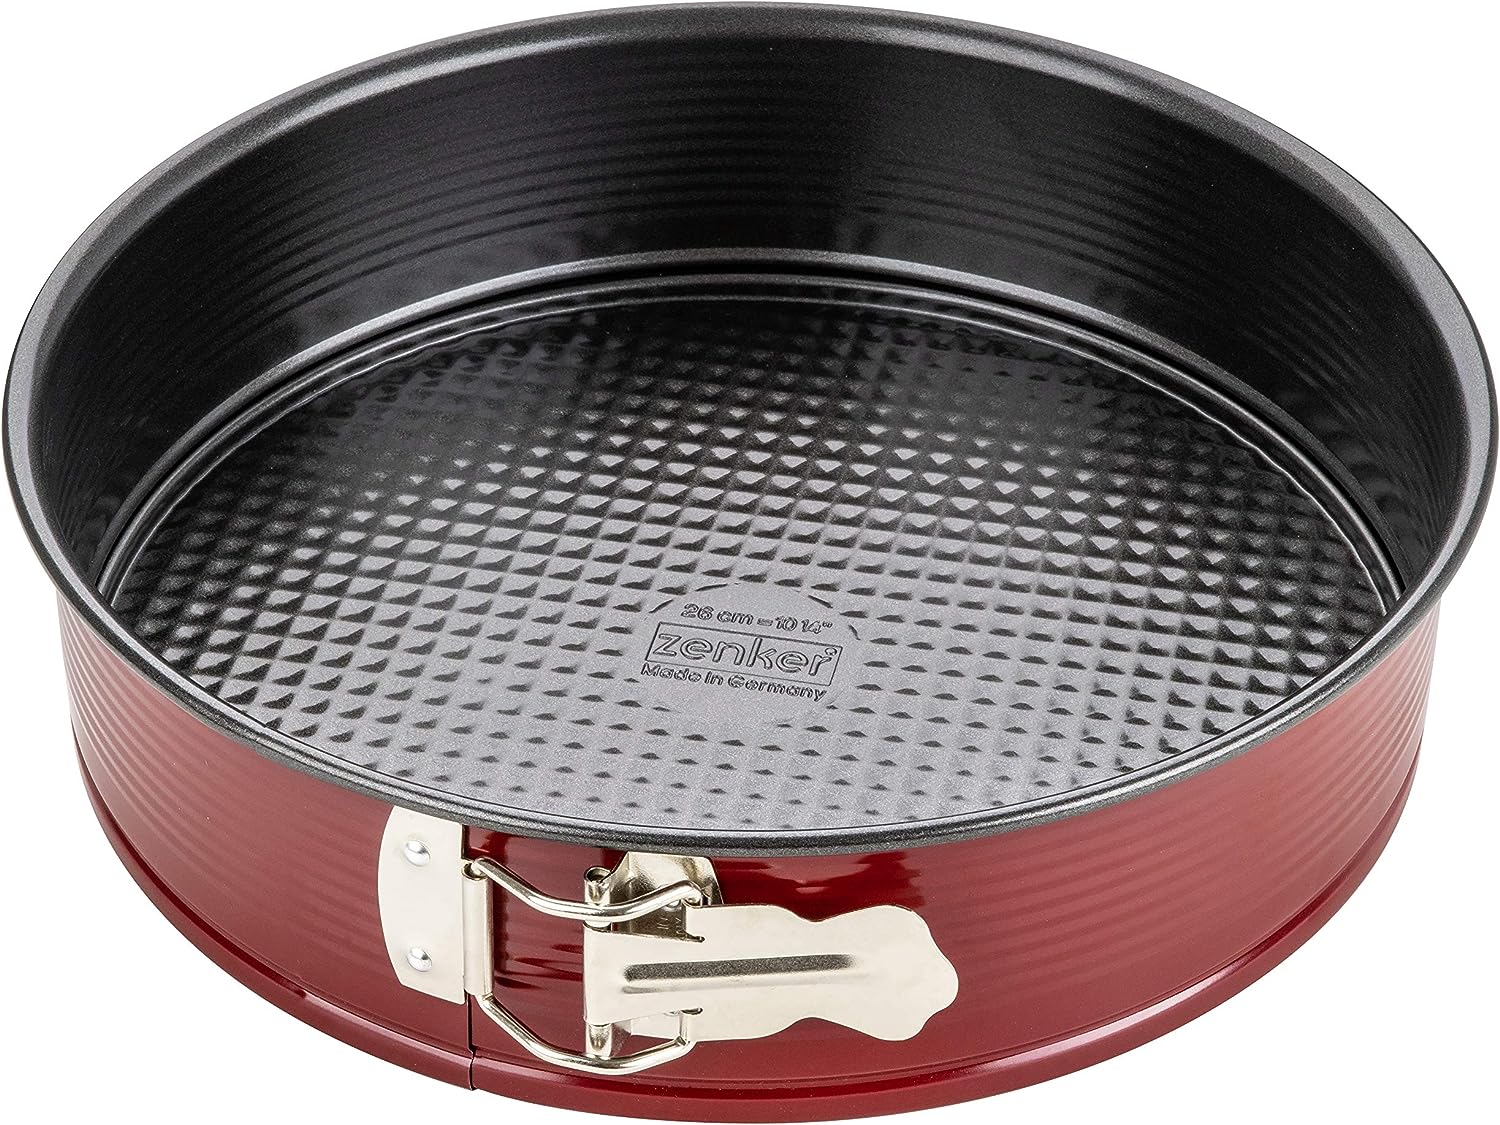 Zenker "Sparkling Christmas" Springform With Flat And Motive Base Steel With Nonstick Coating, Red/Black